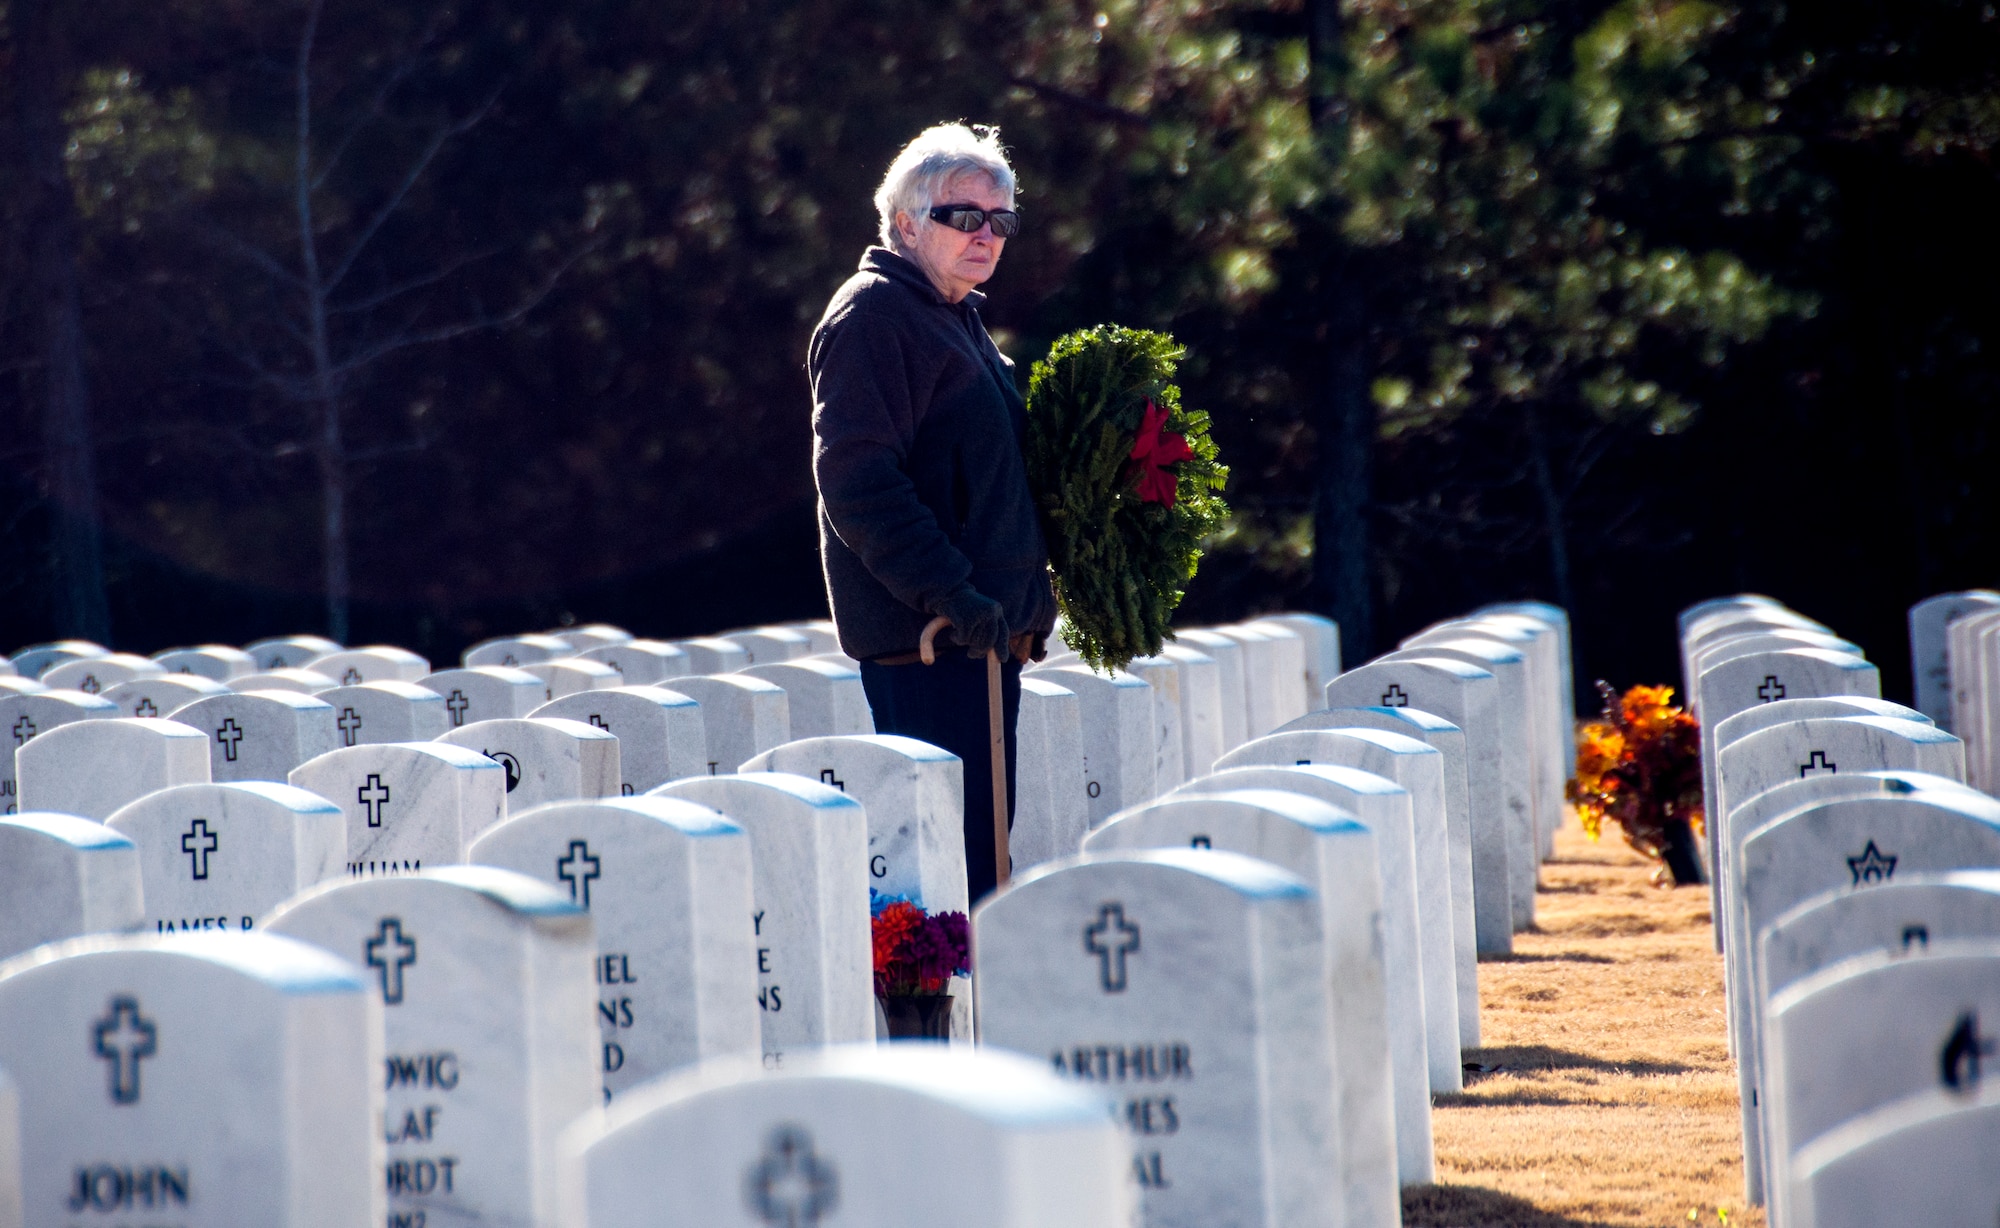 A volunteer prepares to lay a wreath for the Wreaths Across America Ceremony at Georgia National Cemetery in Canton, Ga. Dec. 13, 2014. Thousands showed up to GNC to honor America’s heroes. (U.S. Air Force photo/Senior Airman Daniel Phelps)